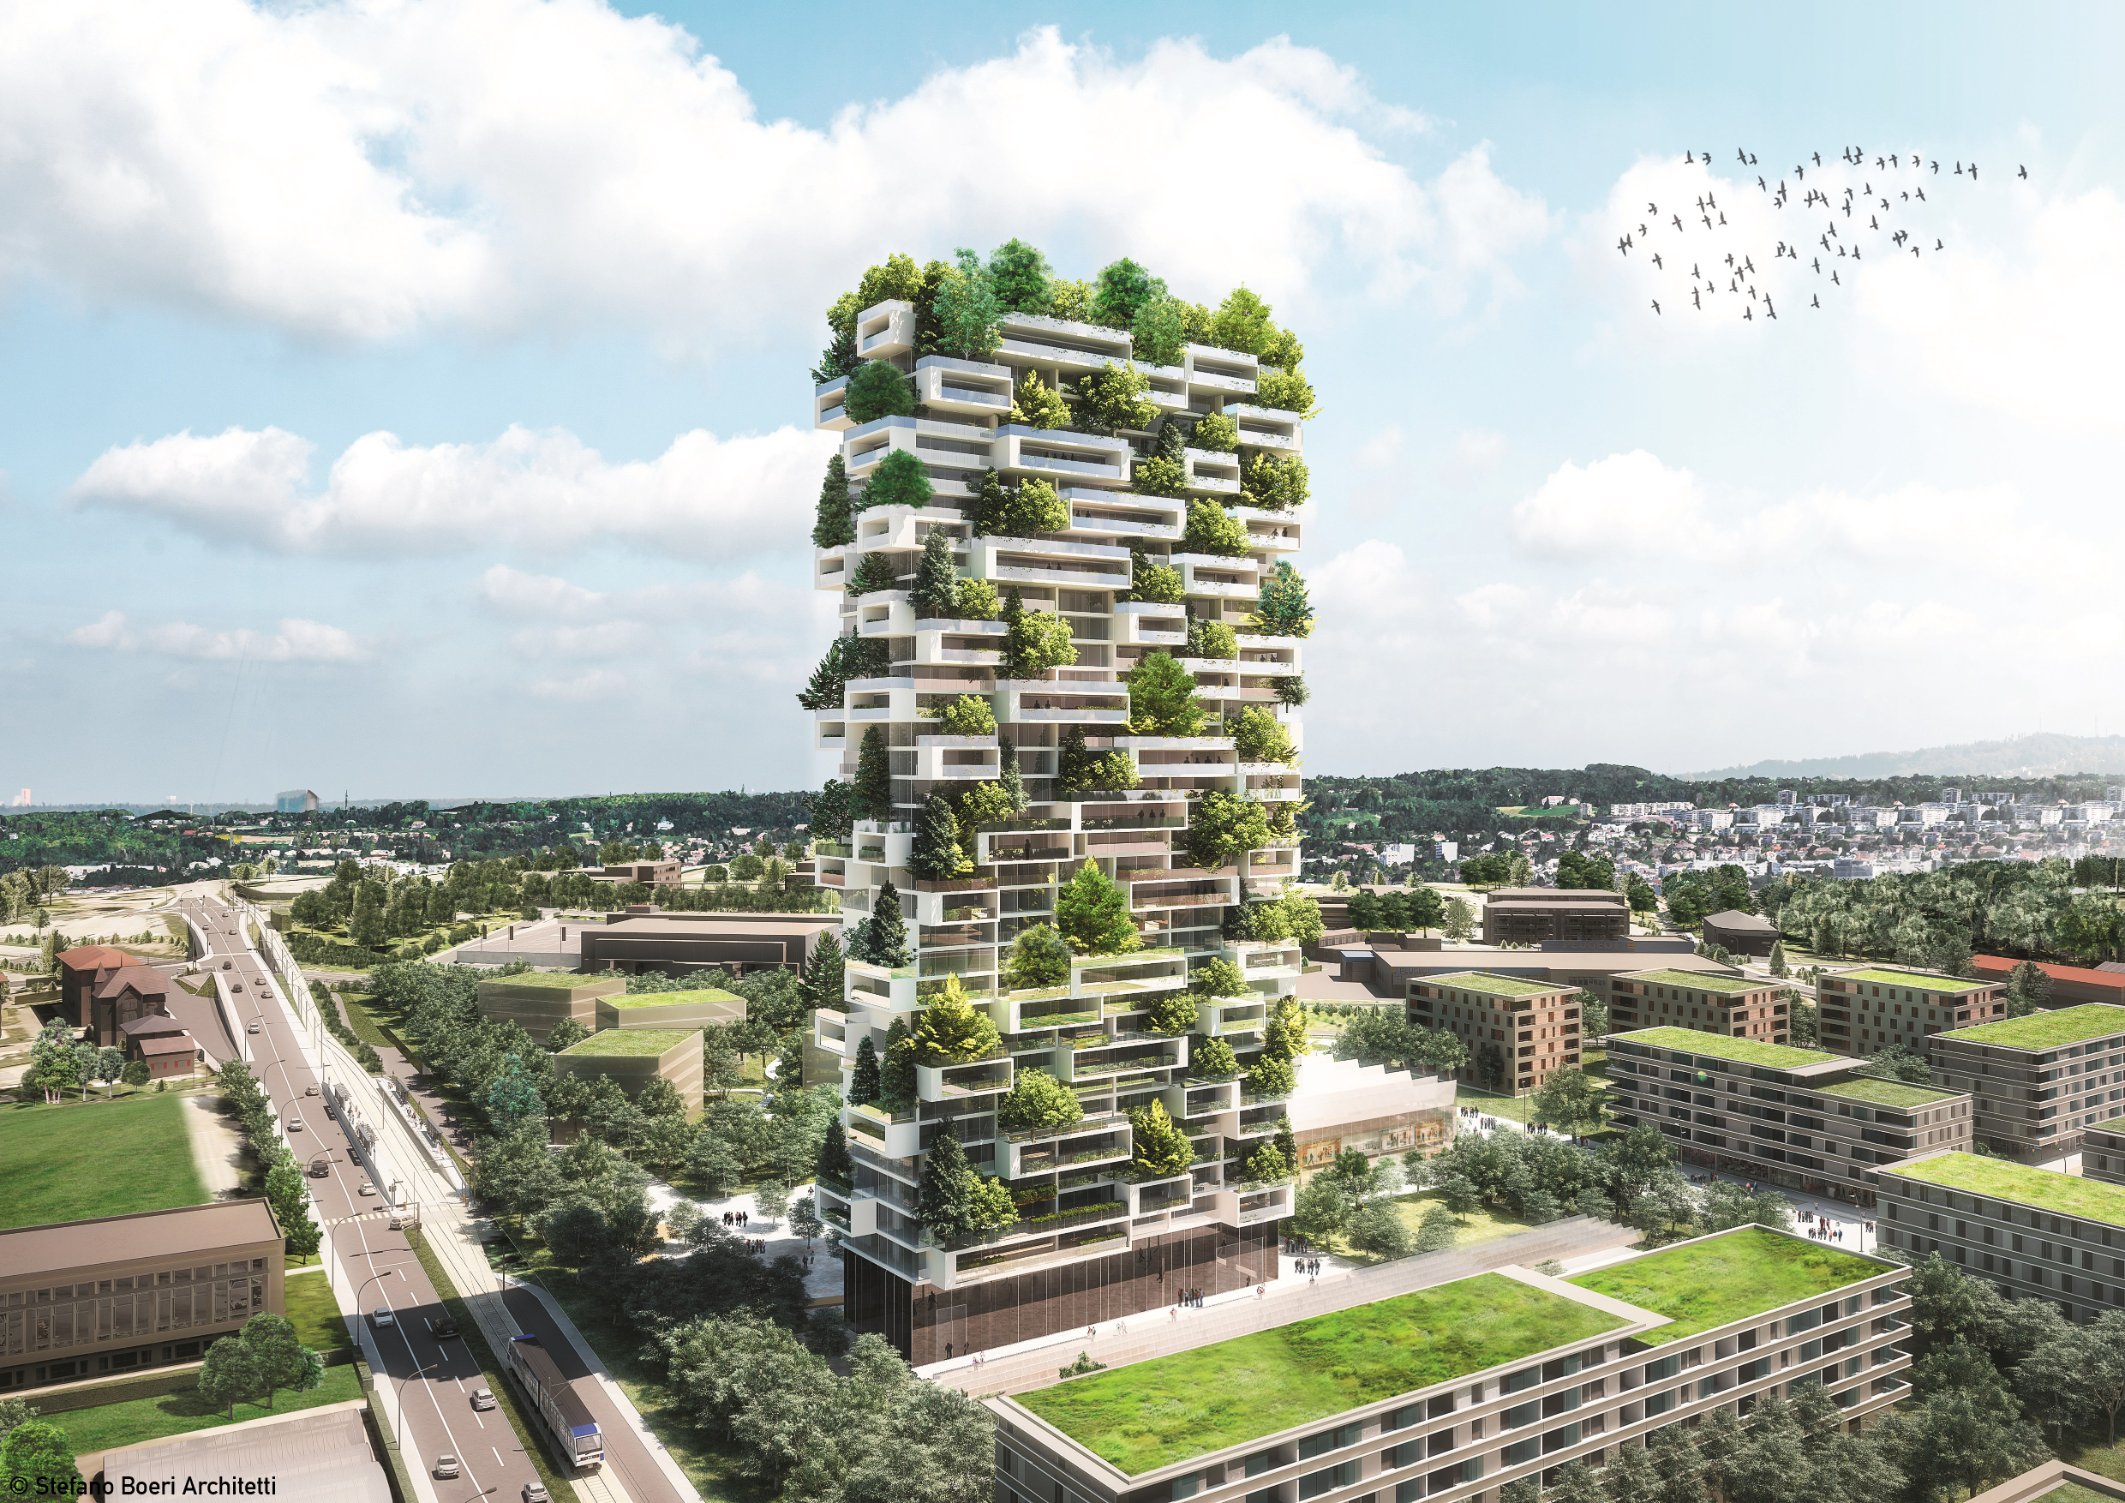 Gardens in the sky: The rise of eco urban architecture - CNN Style